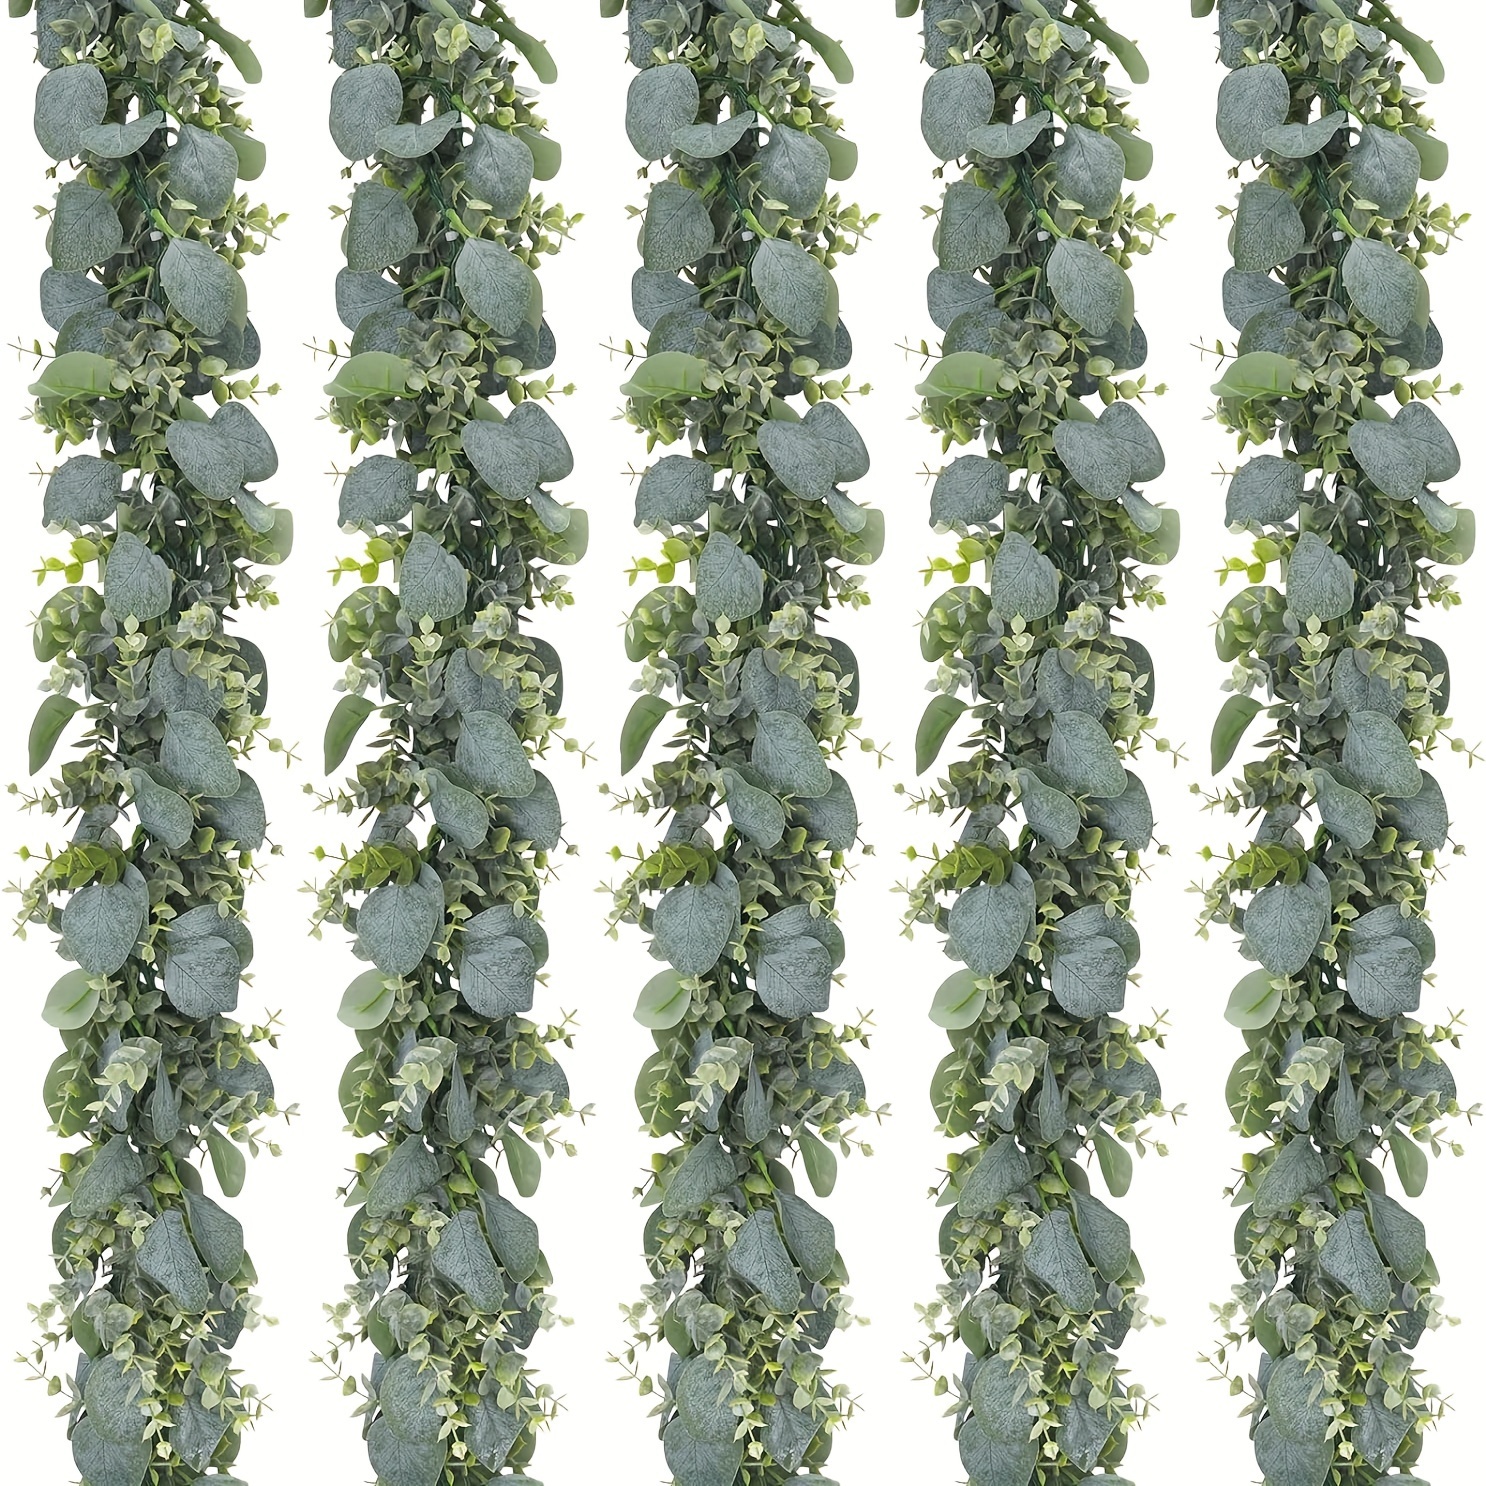 16pcs Artificial Italian Ruscus Greenery Stem, Faux Floral Hanging Greenery  Spray For Wedding Bouquet,Arch,Table Centerpieces And Home Decor